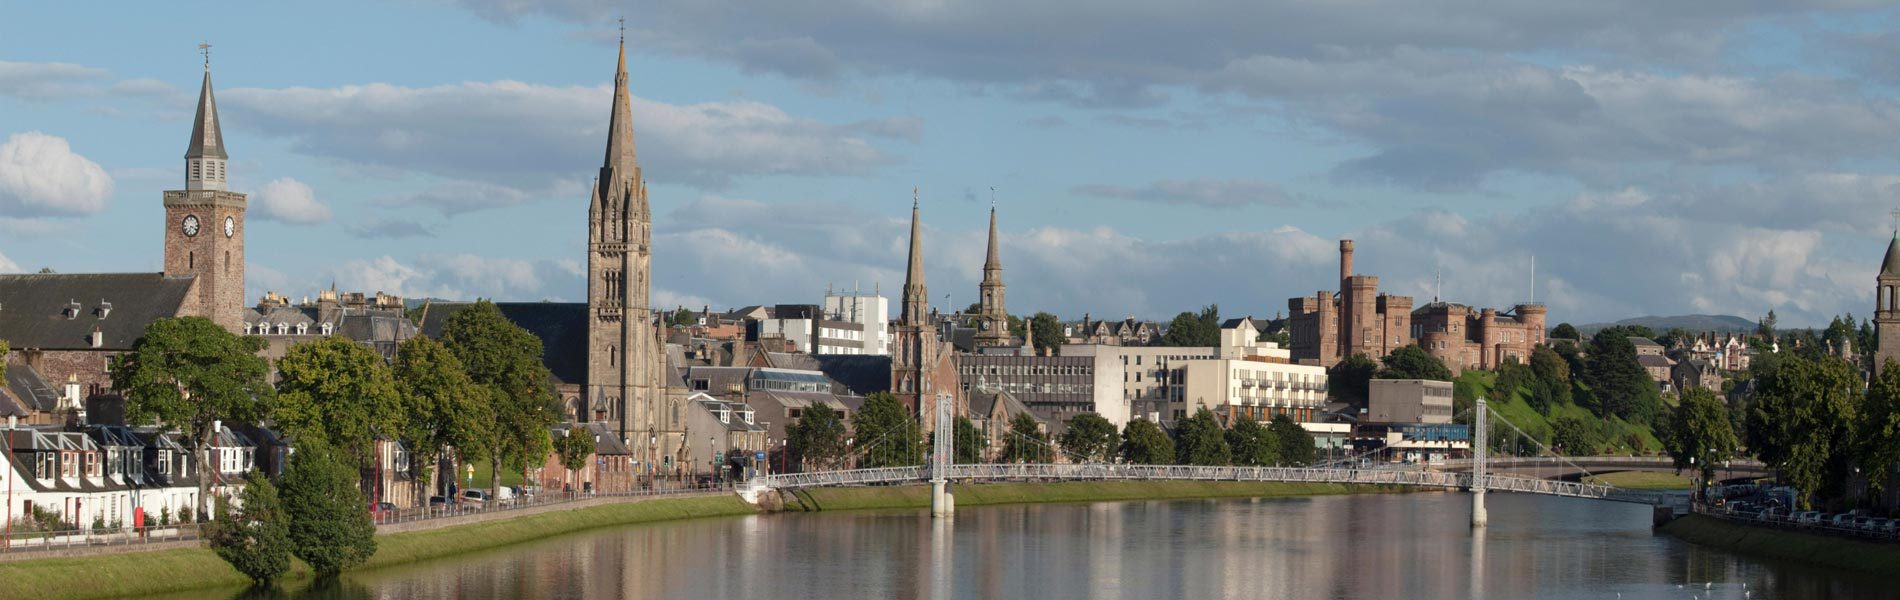 Inverness-Title